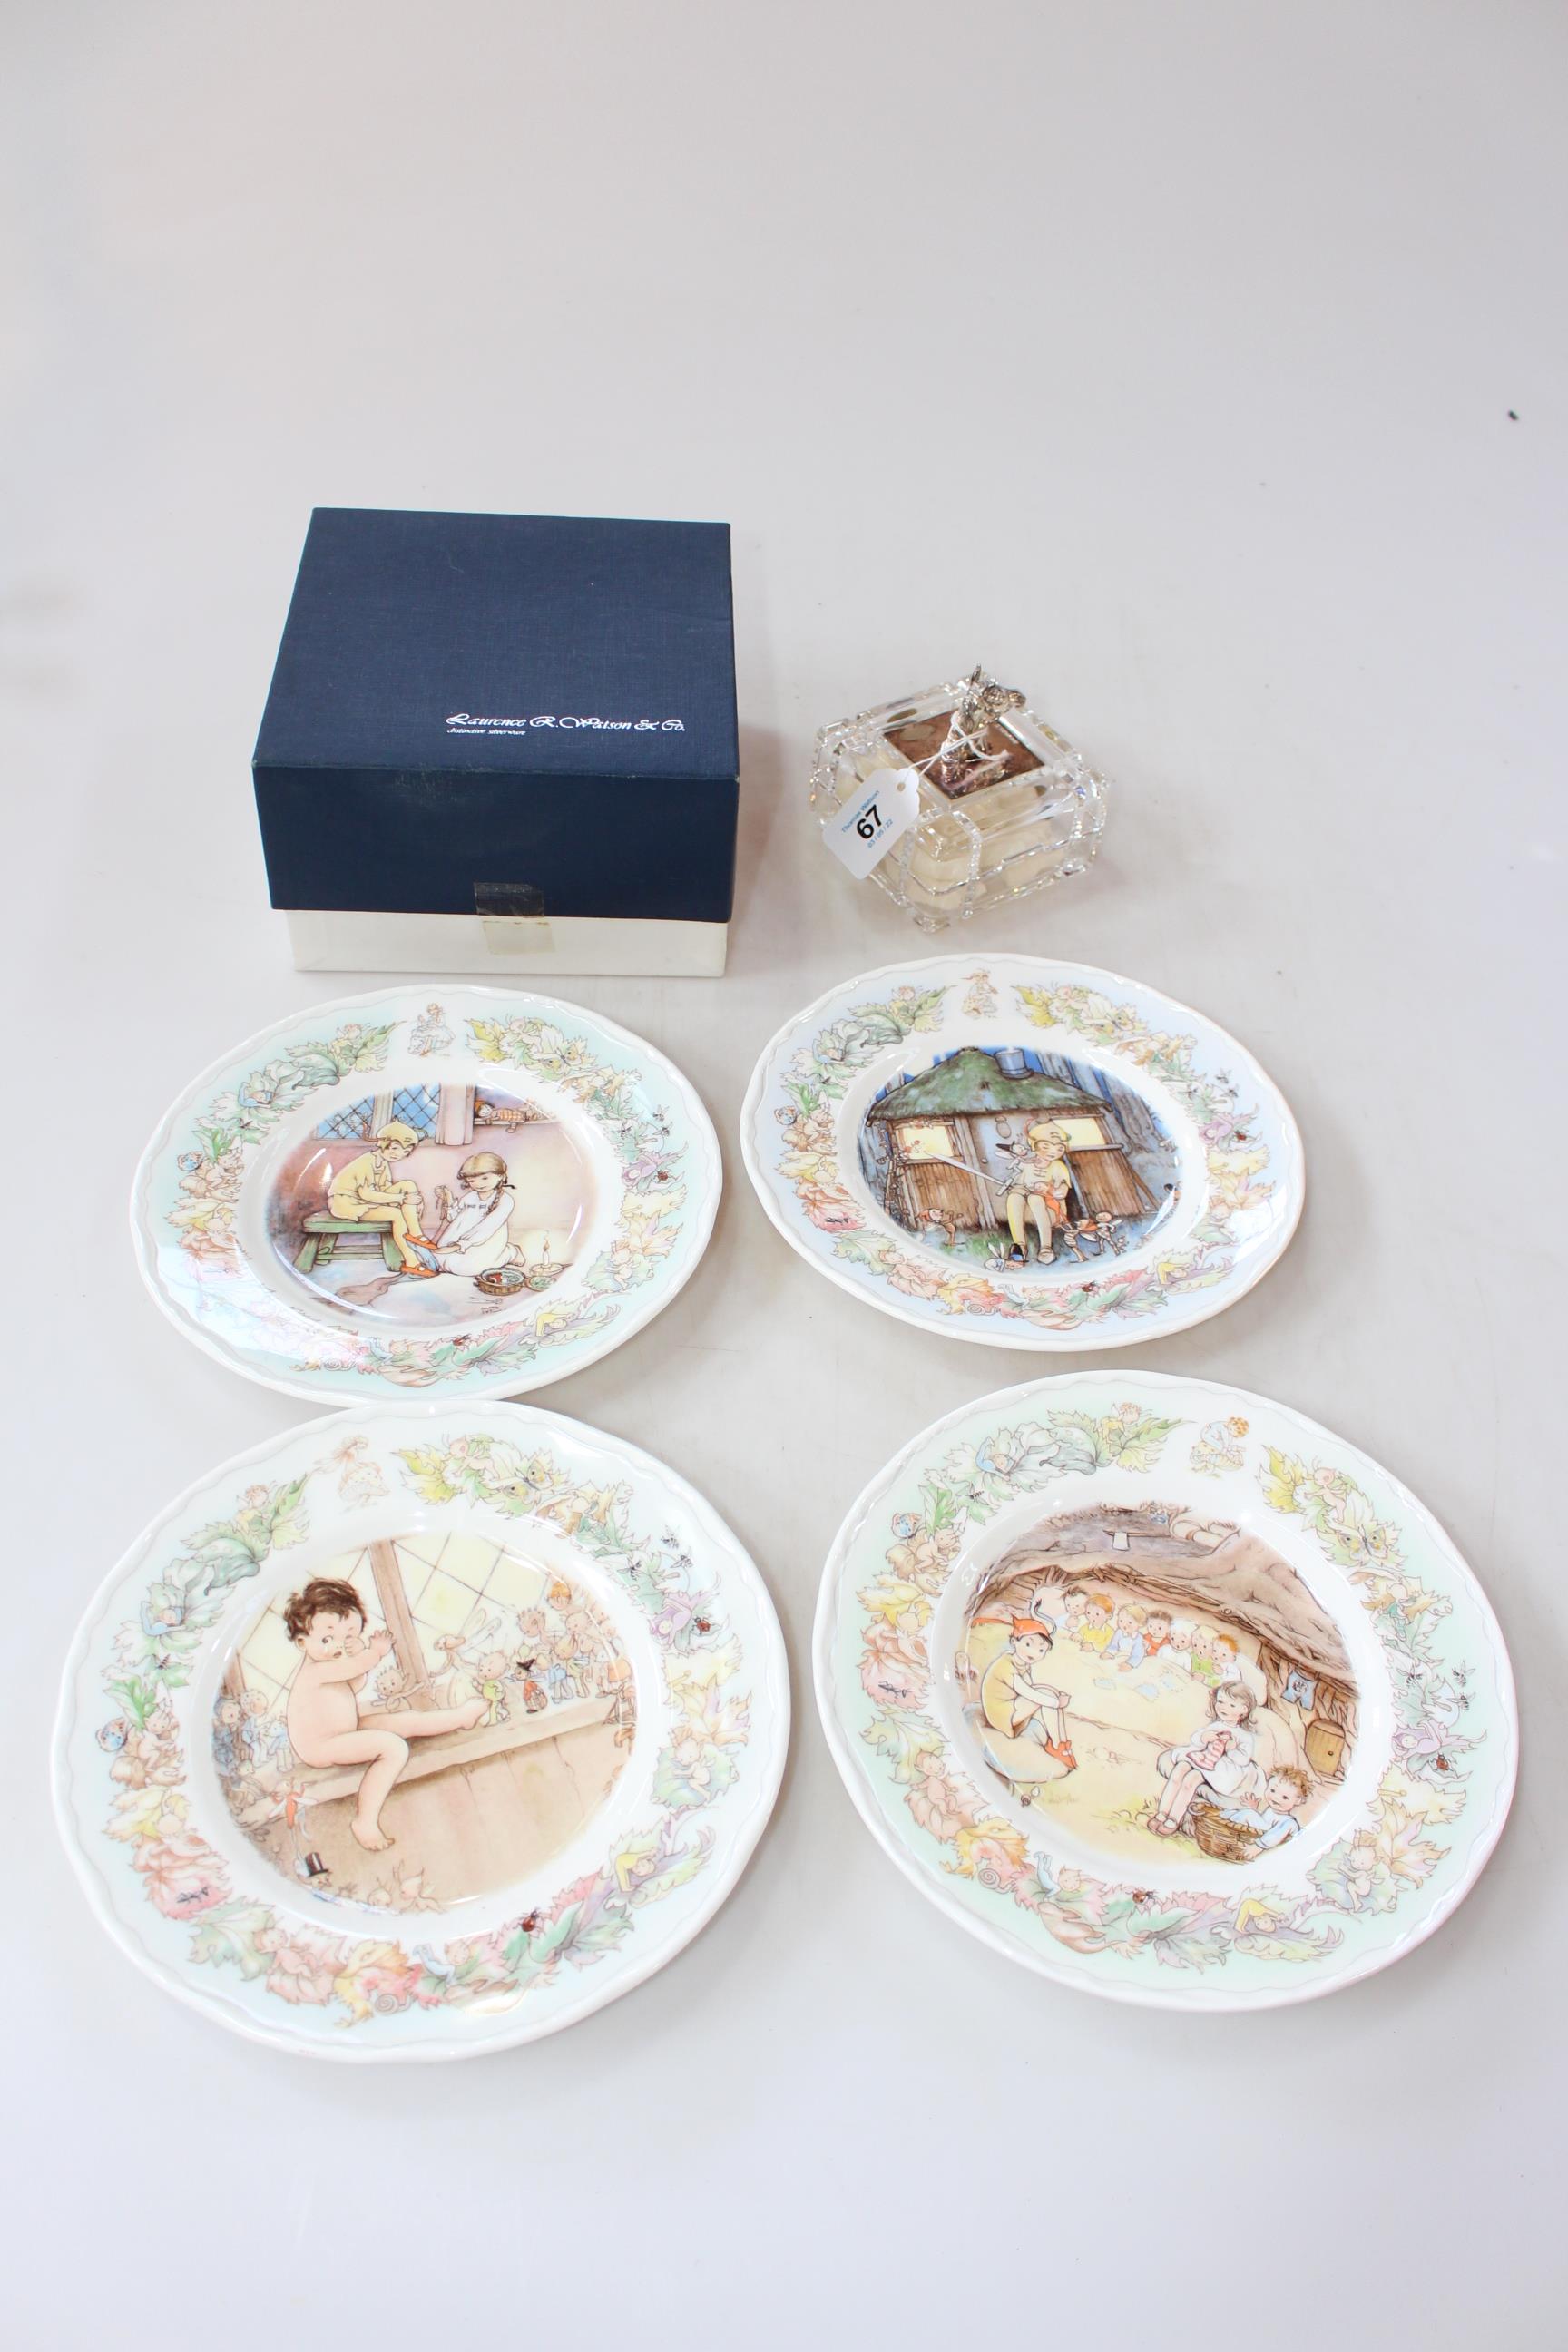 Arklow Patricia decorative coffee set, Laurence R. Watson & Co box, plates, etc. - Image 3 of 3